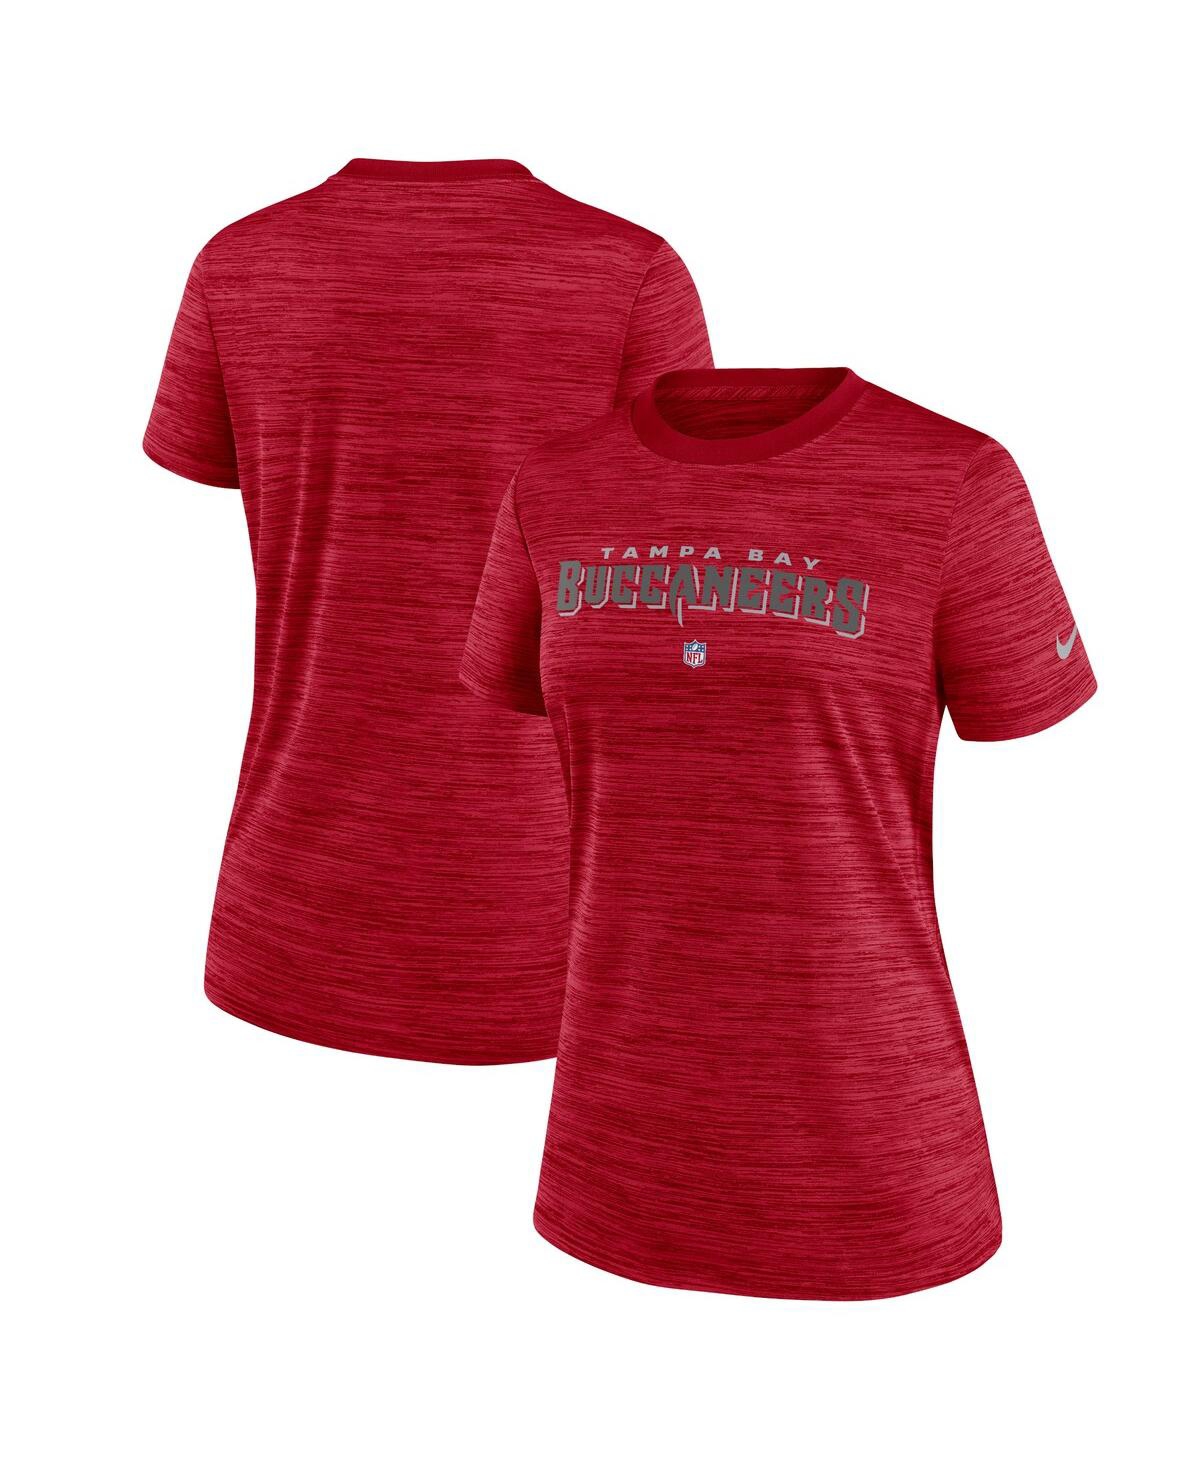 Shop Nike Women's  Red Tampa Bay Buccaneers Sideline Velocity Performance T-shirt